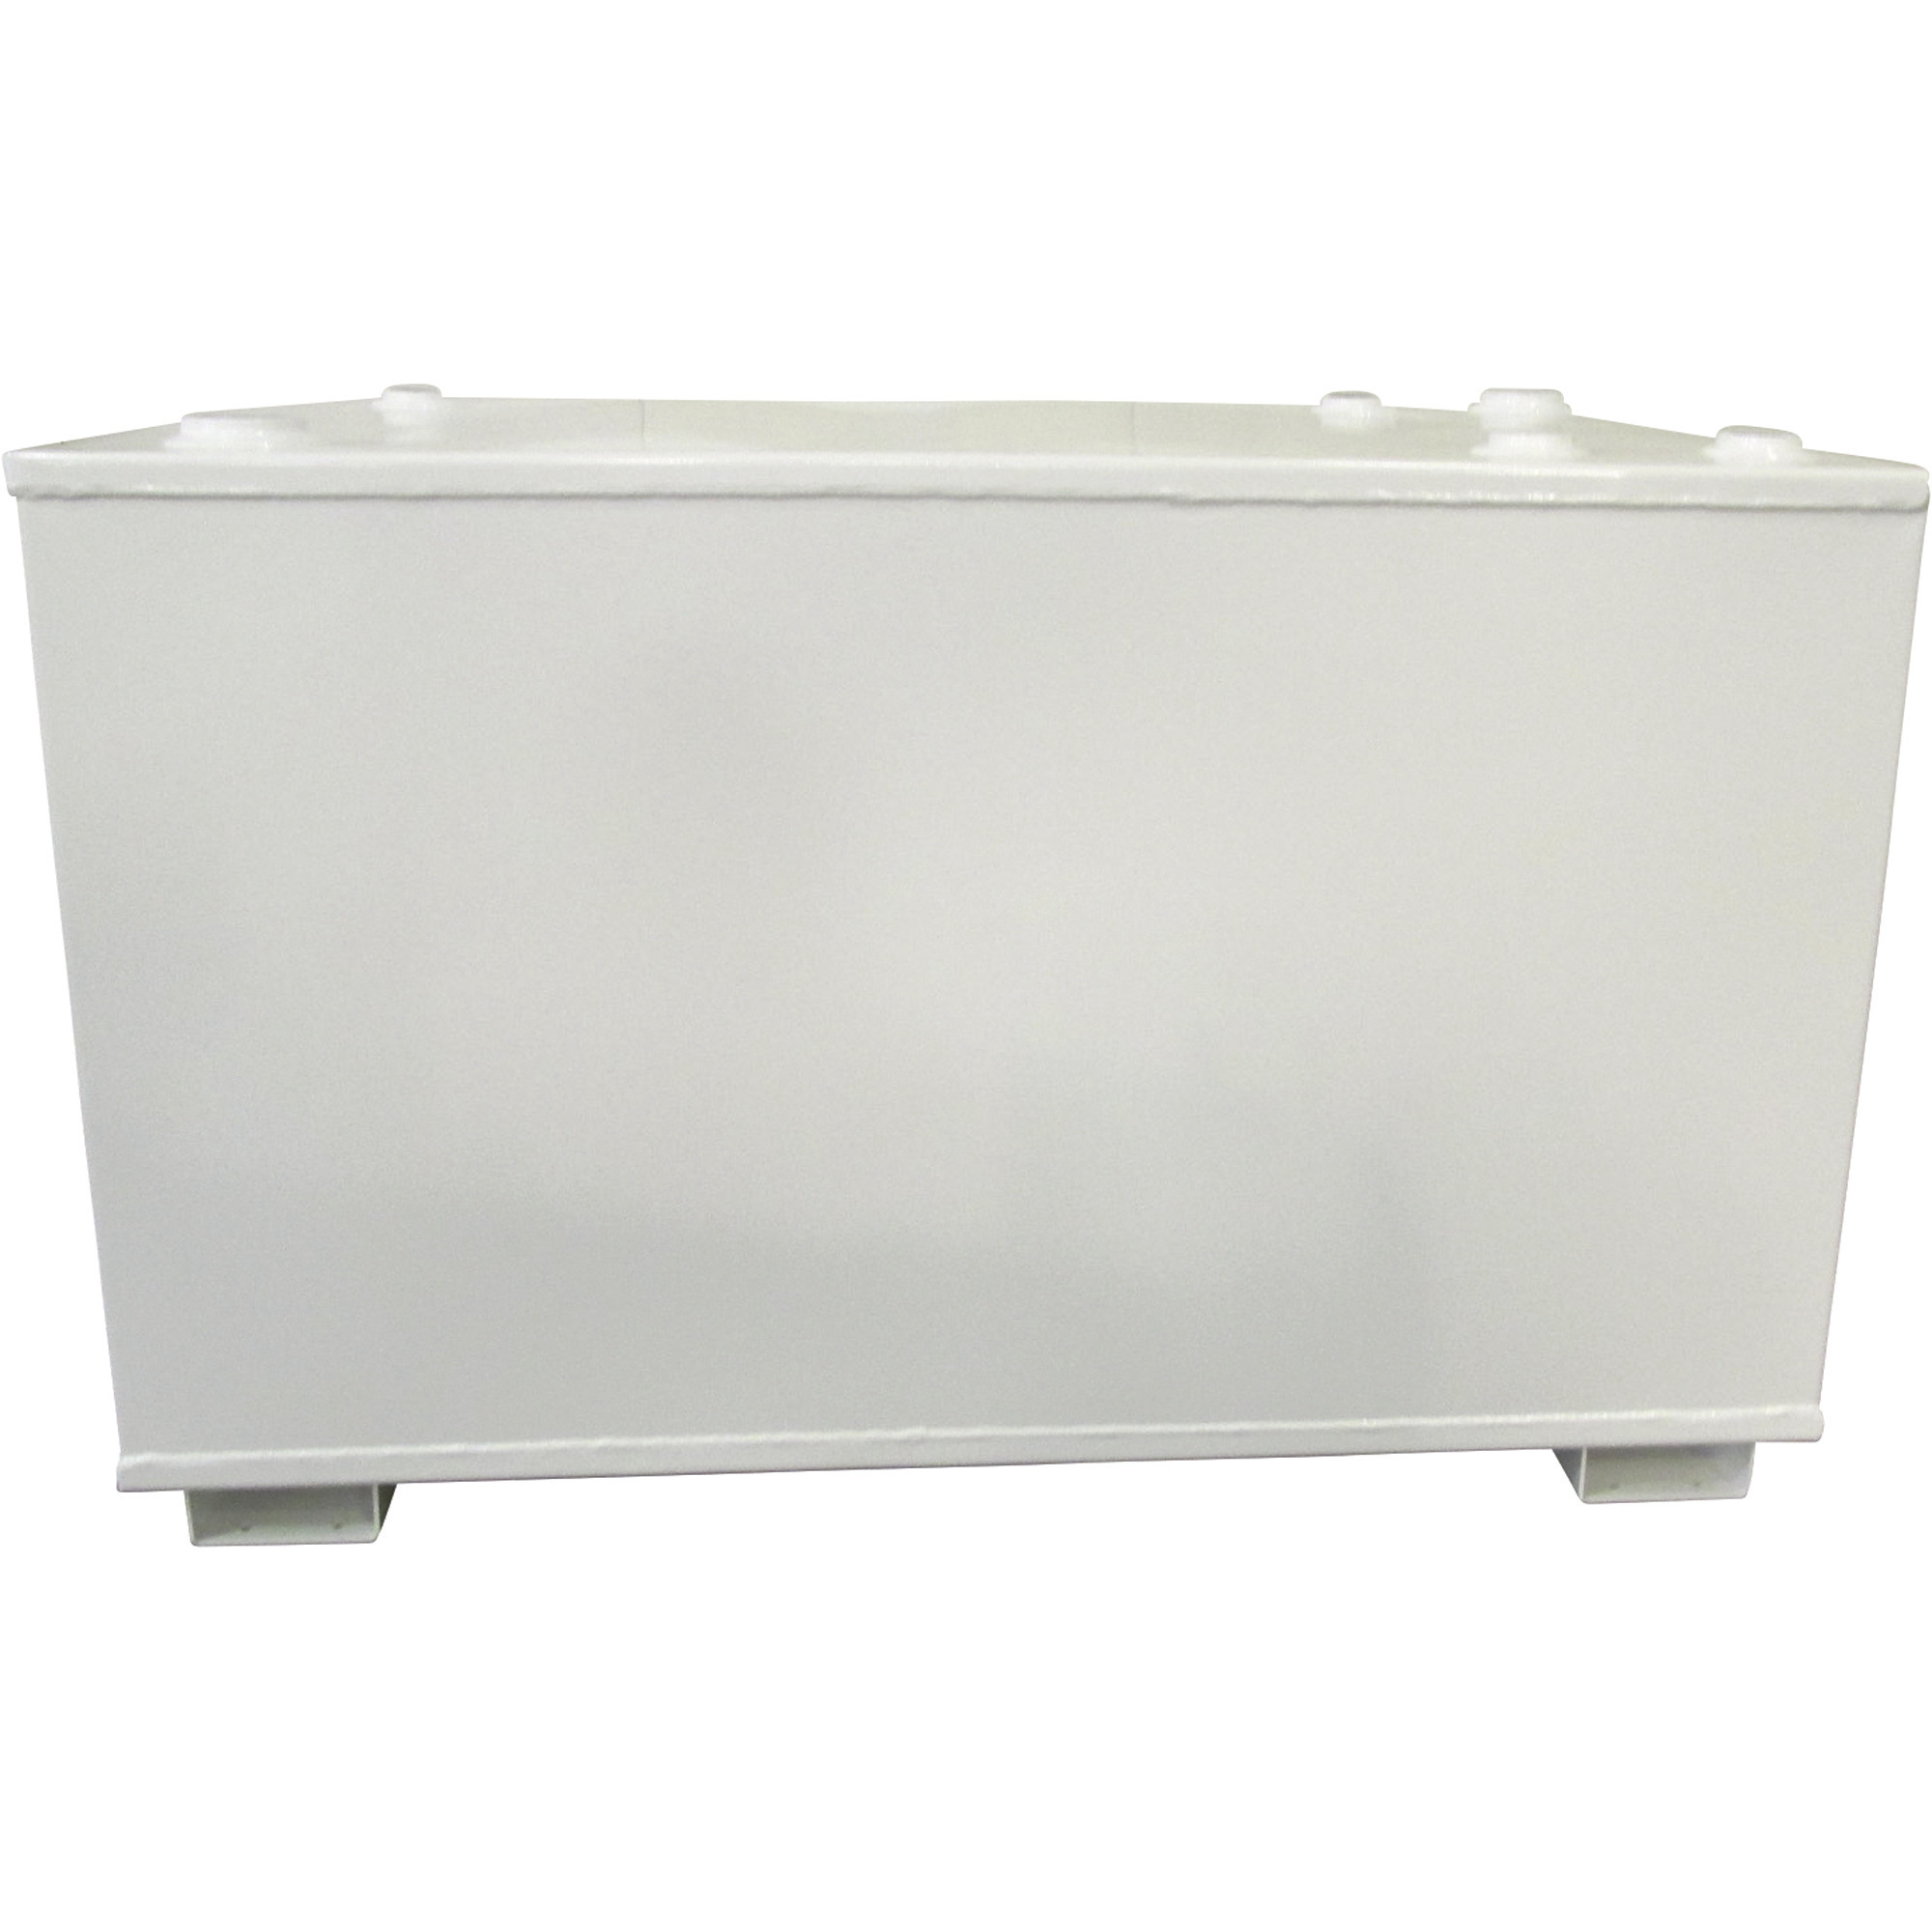 Midwest Industrial Tanks Double-Wall Storage Fuel Tank, 500-Gallon, Model RTD-CC-500-10-12